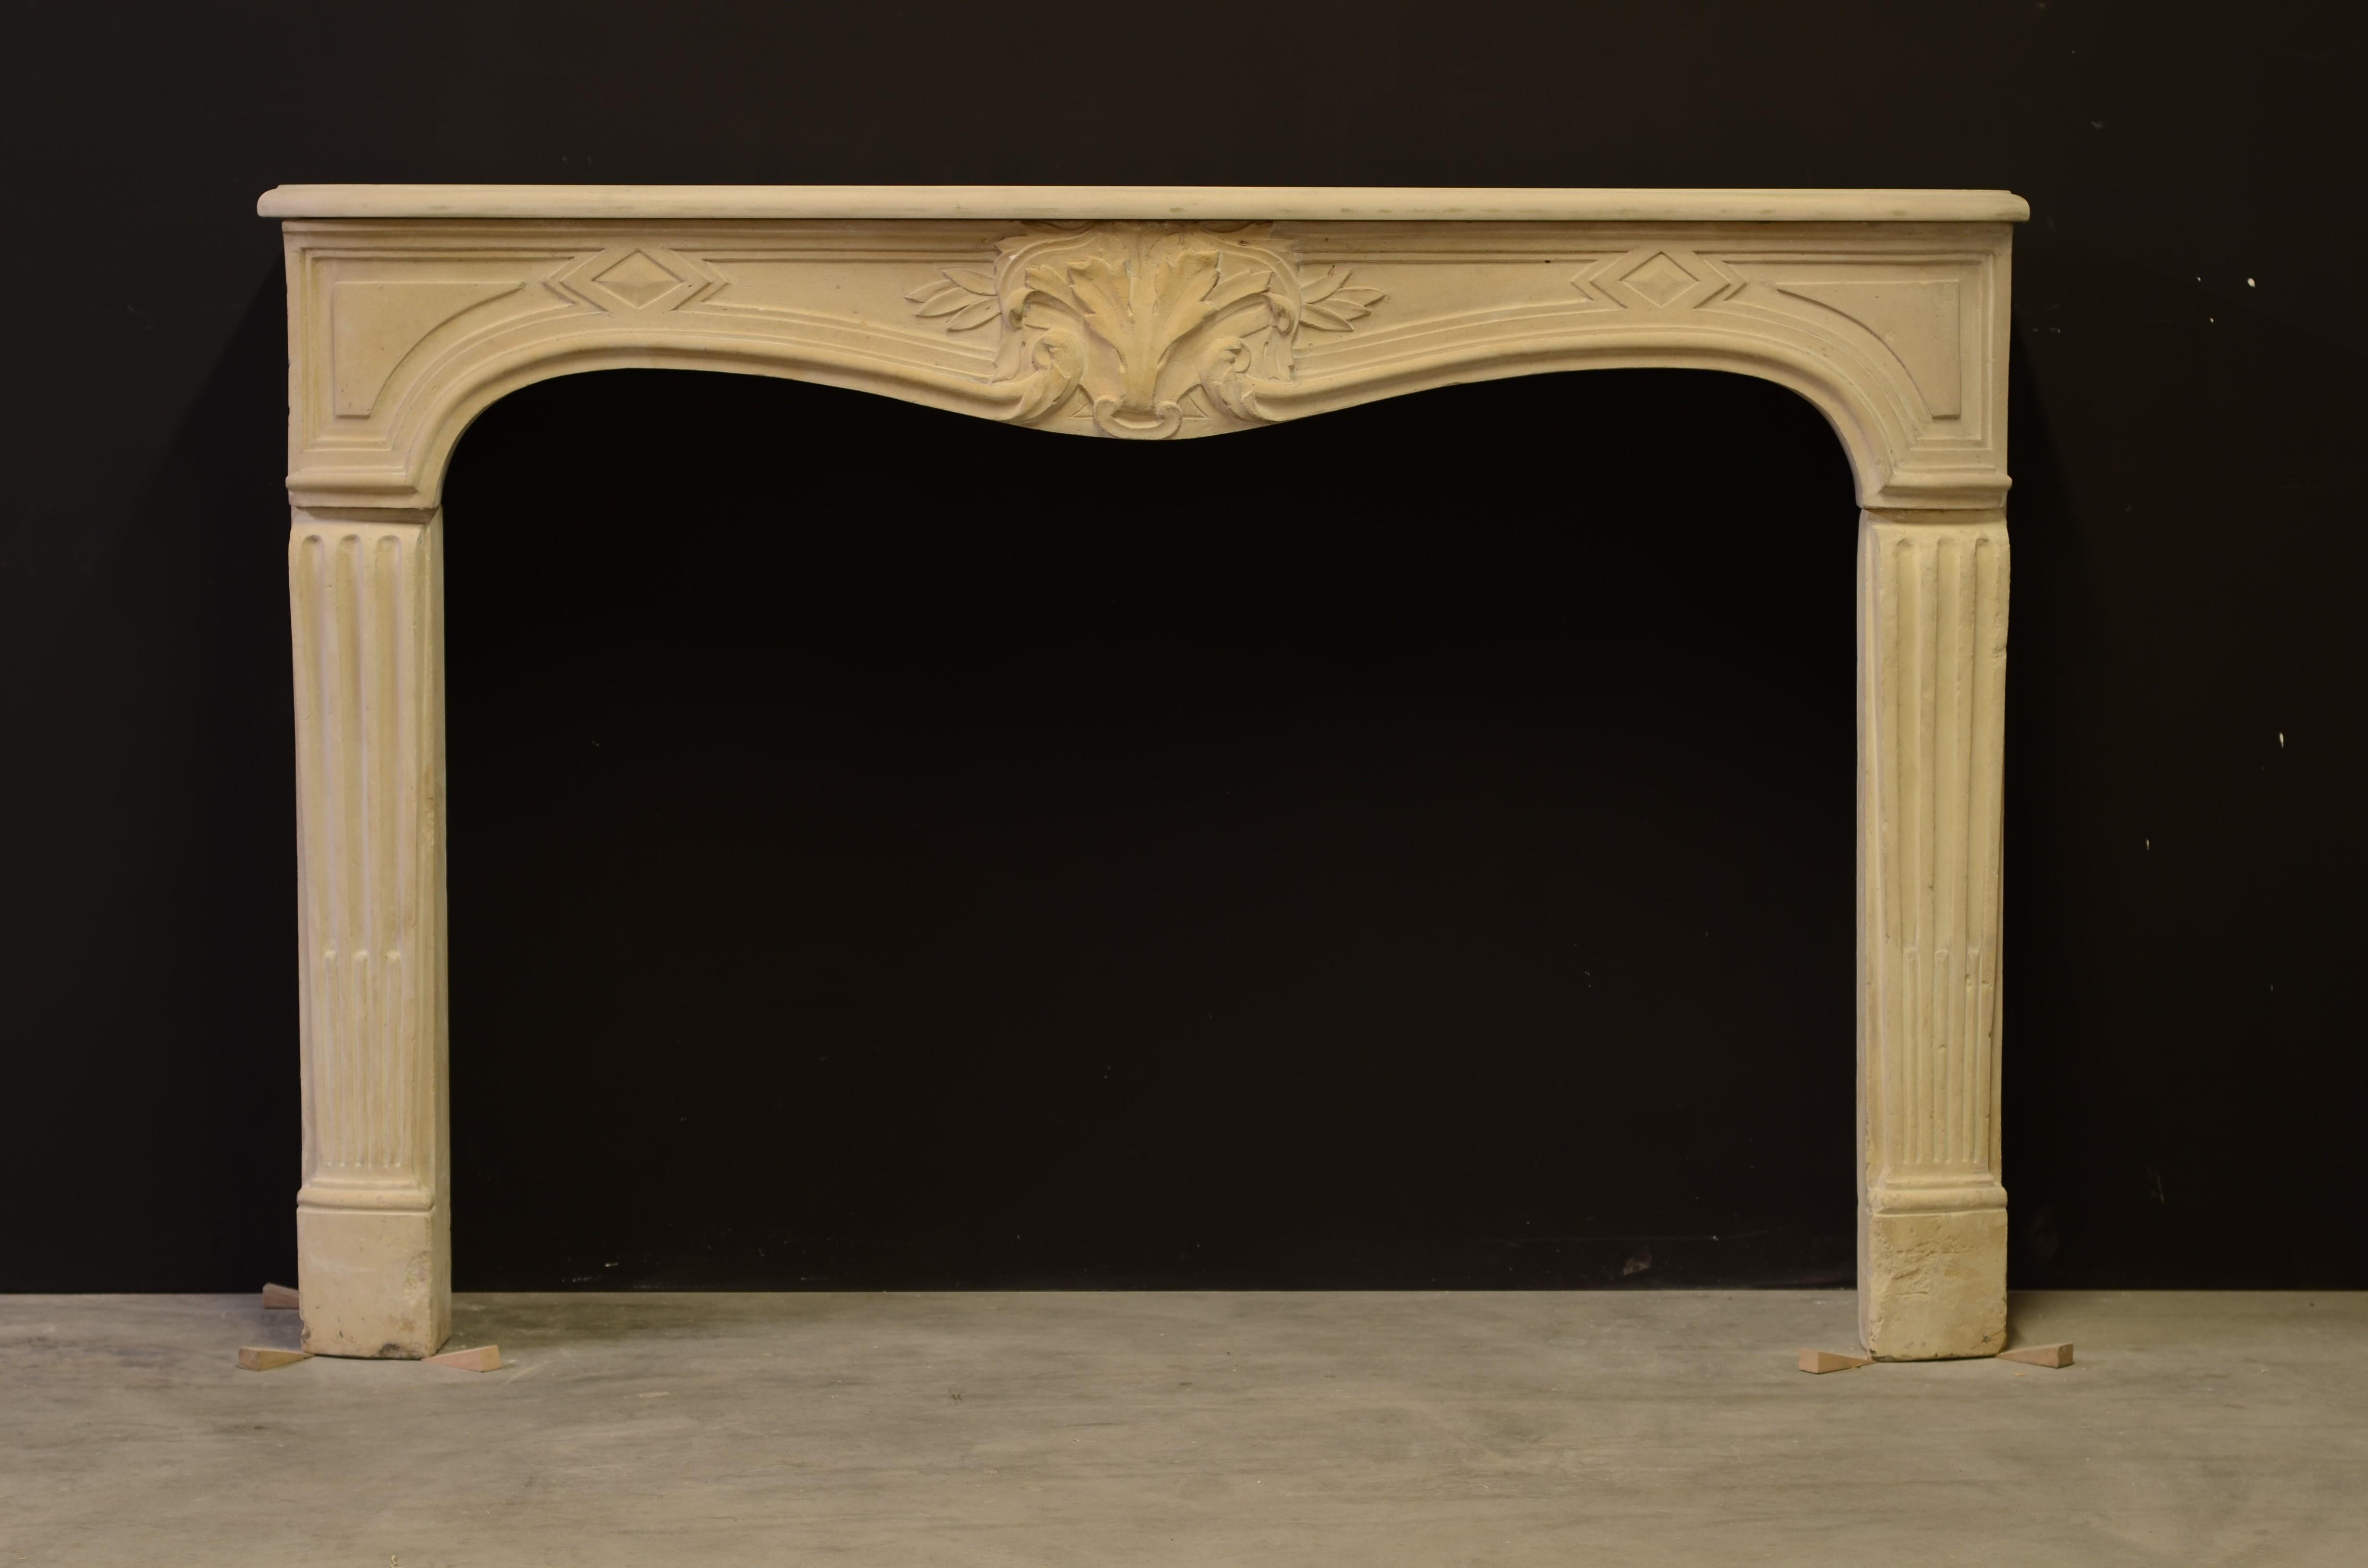 Lovely antique limestone Louis XV fireplace mantel.
Nice warm colored limestone mantel, beautifully decorated.
Sides are not original, nice patina and in overall good condition.

Sold by Schermerhorn Antique Fireplaces.